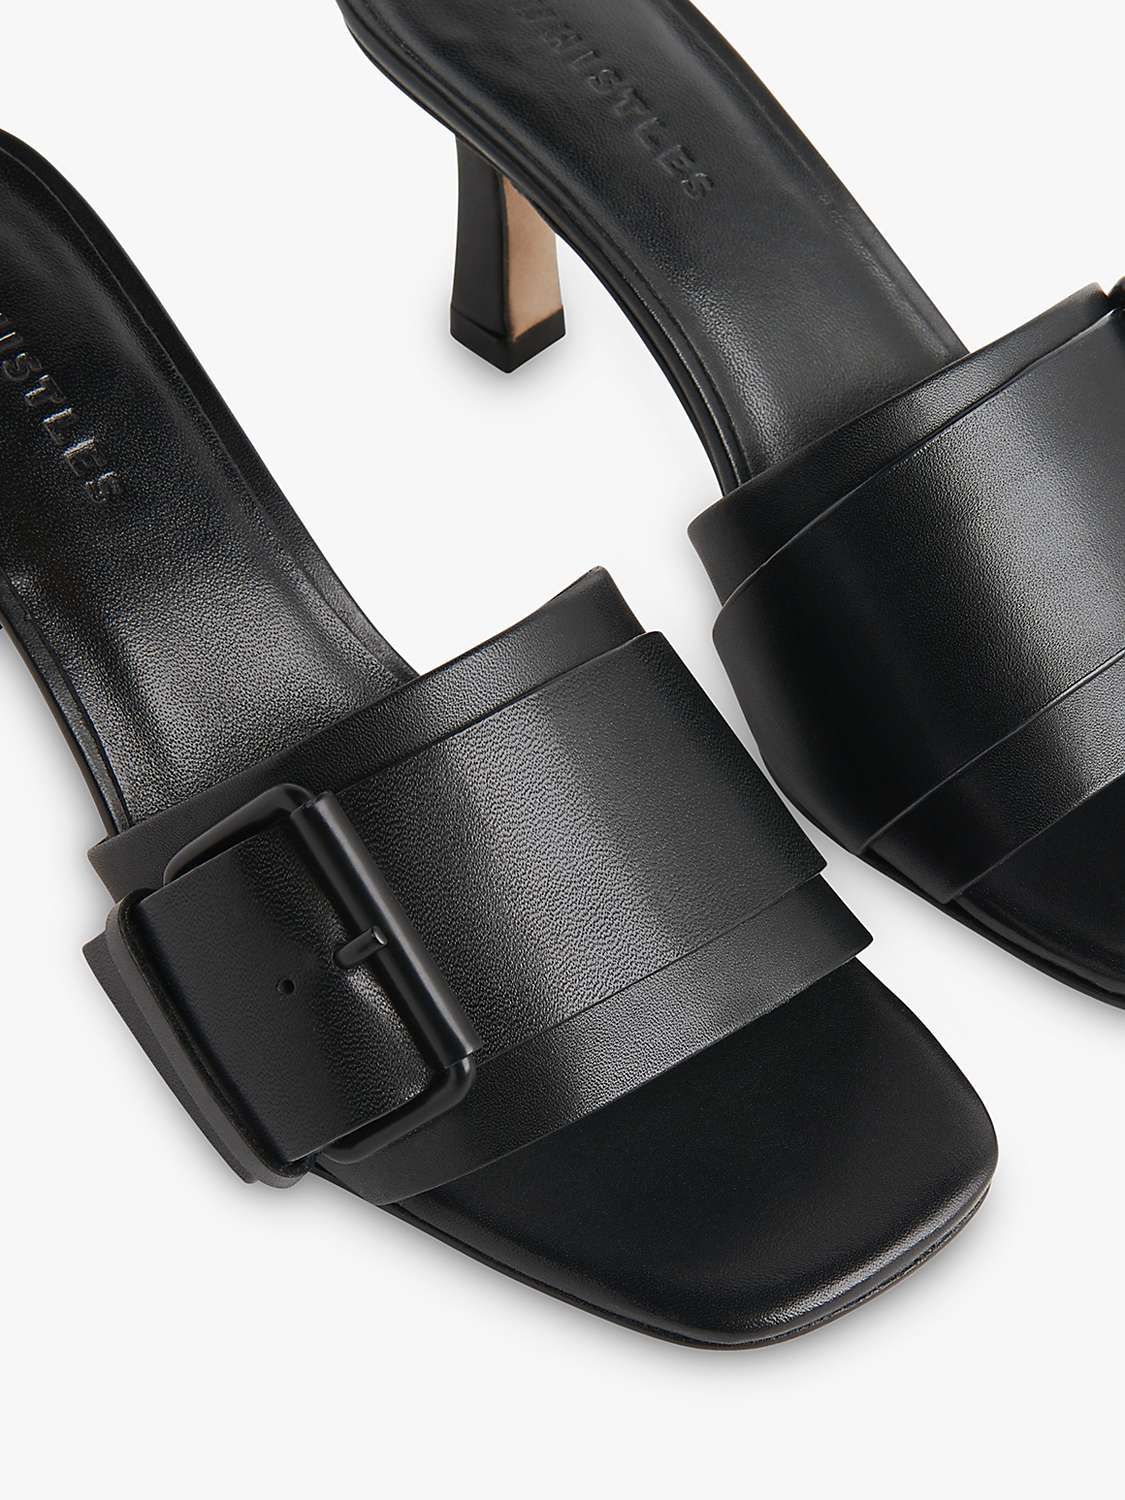 Buy Whistles Adella Leather Buckle Mule Sandals Online at johnlewis.com